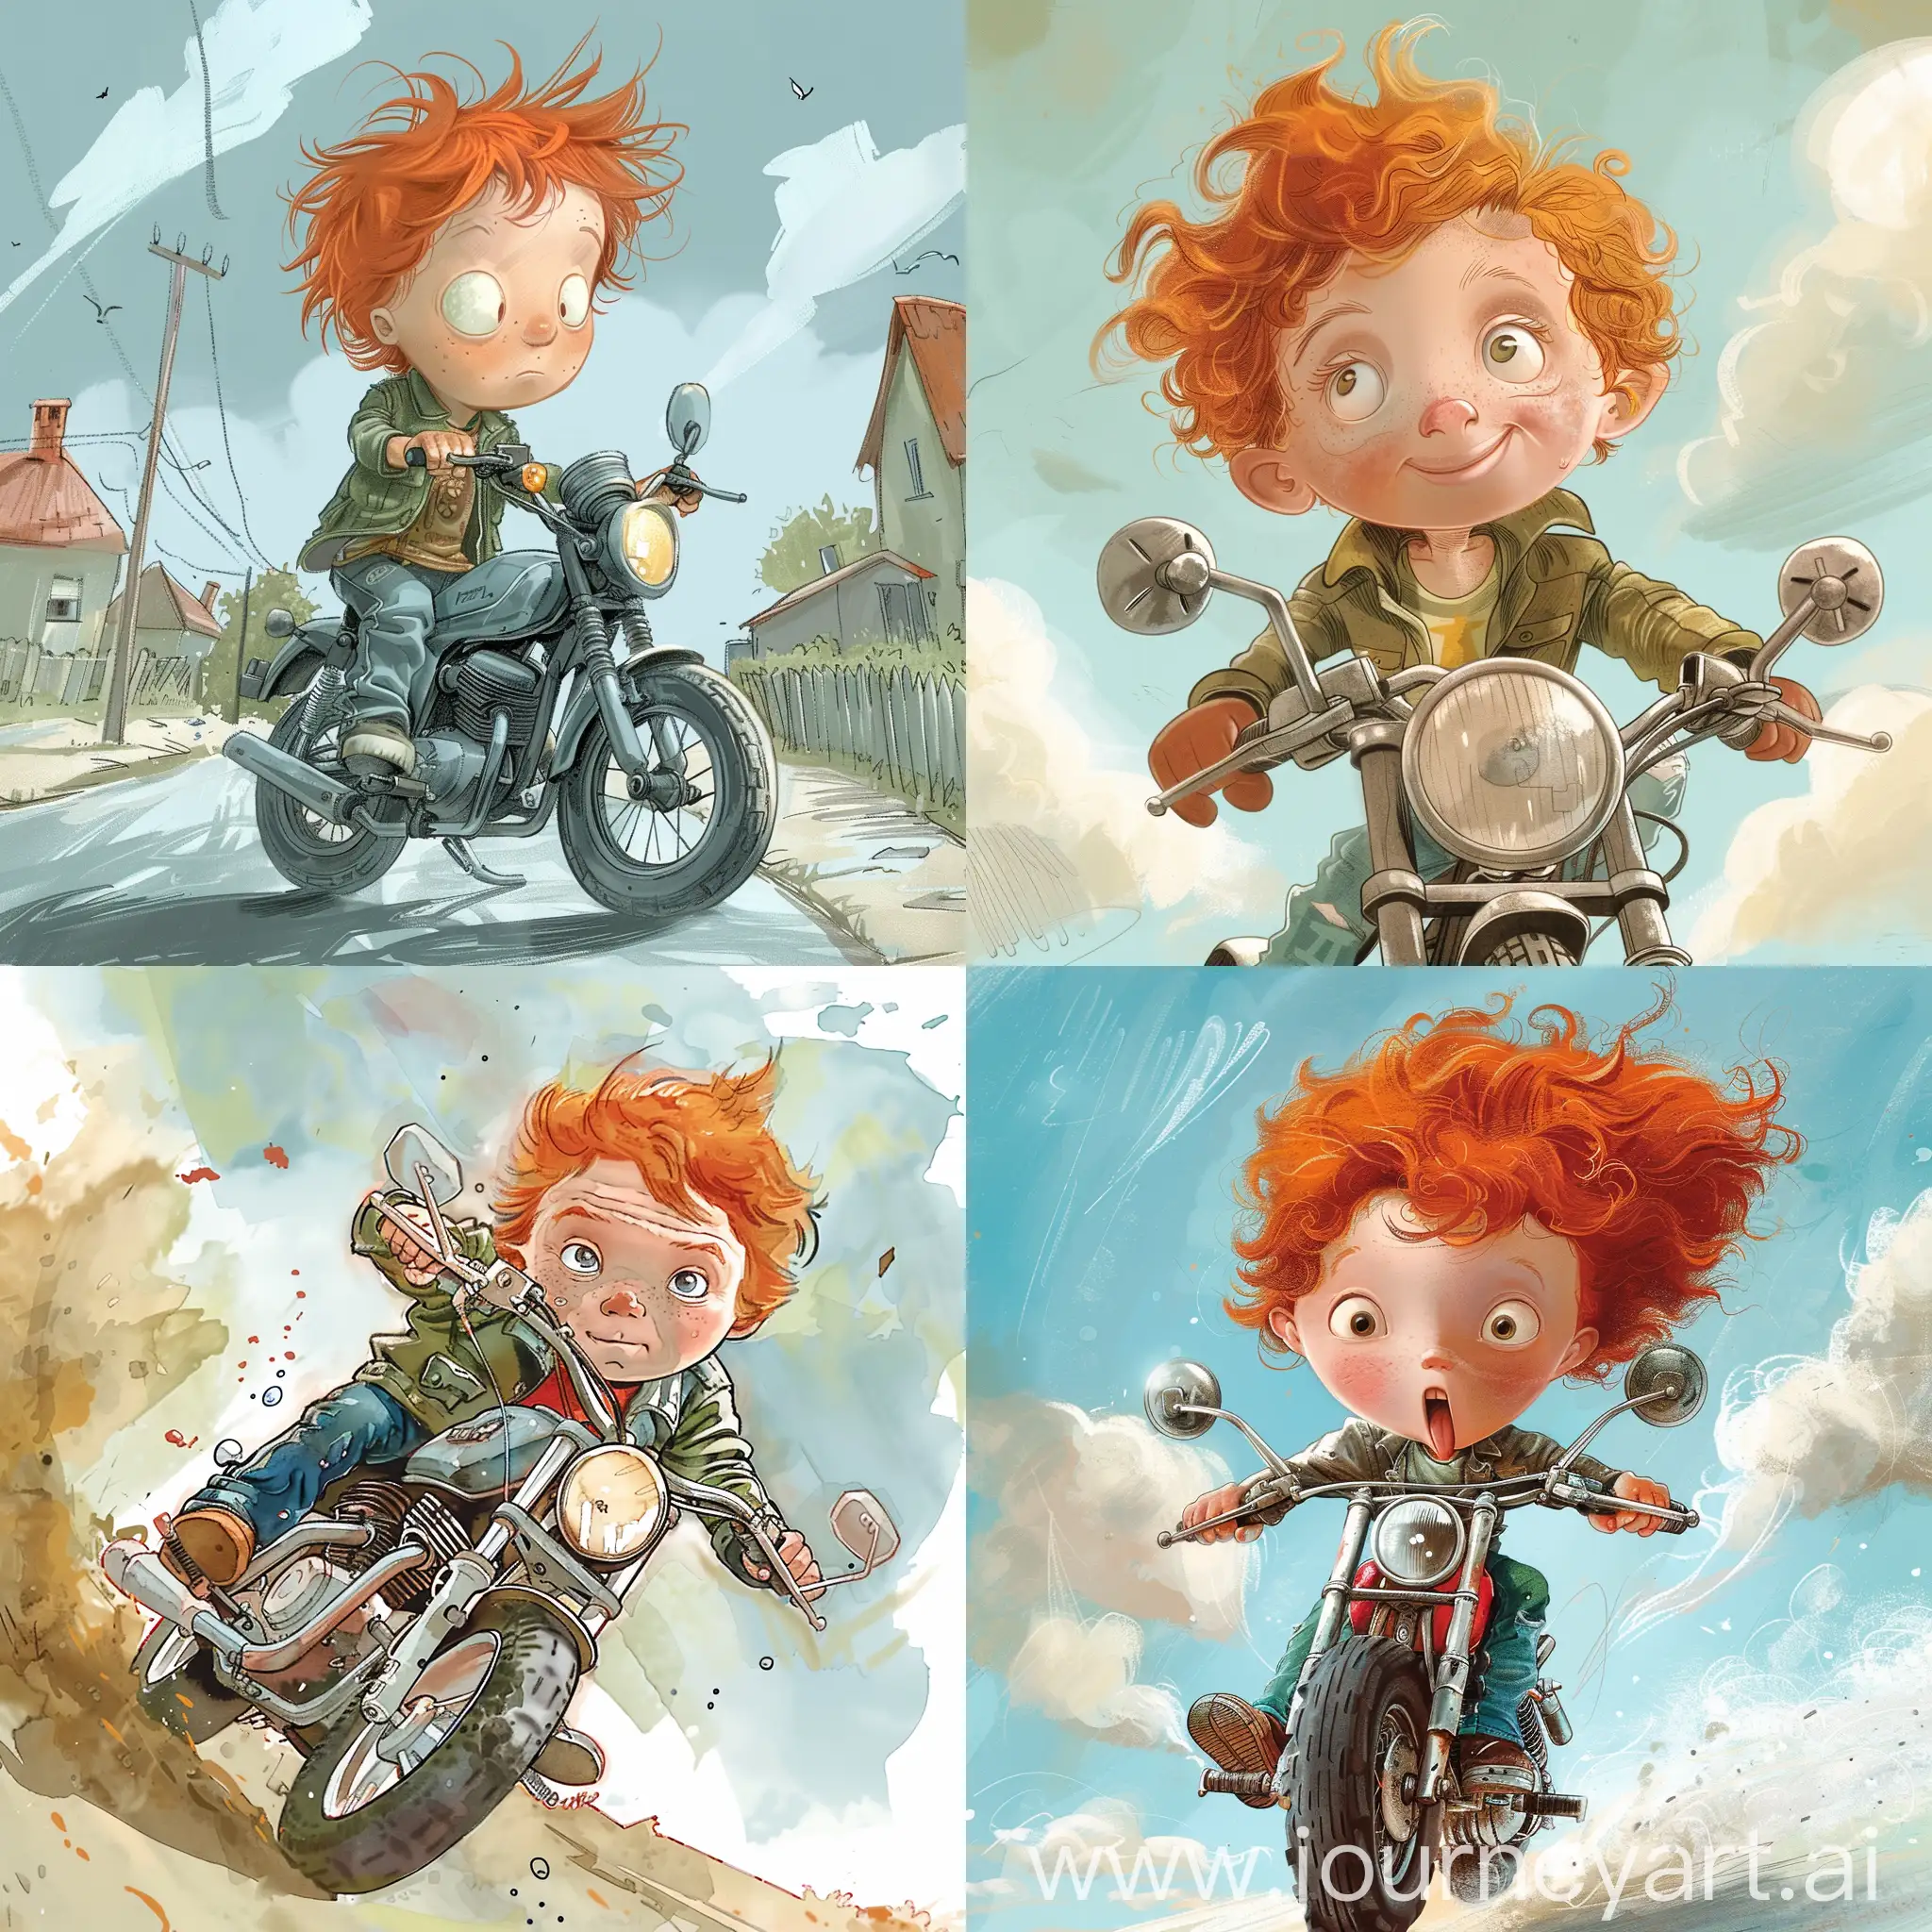 RedHaired-5YearOld-Boy-Riding-Motorcycle-Childrens-Book-Illustration